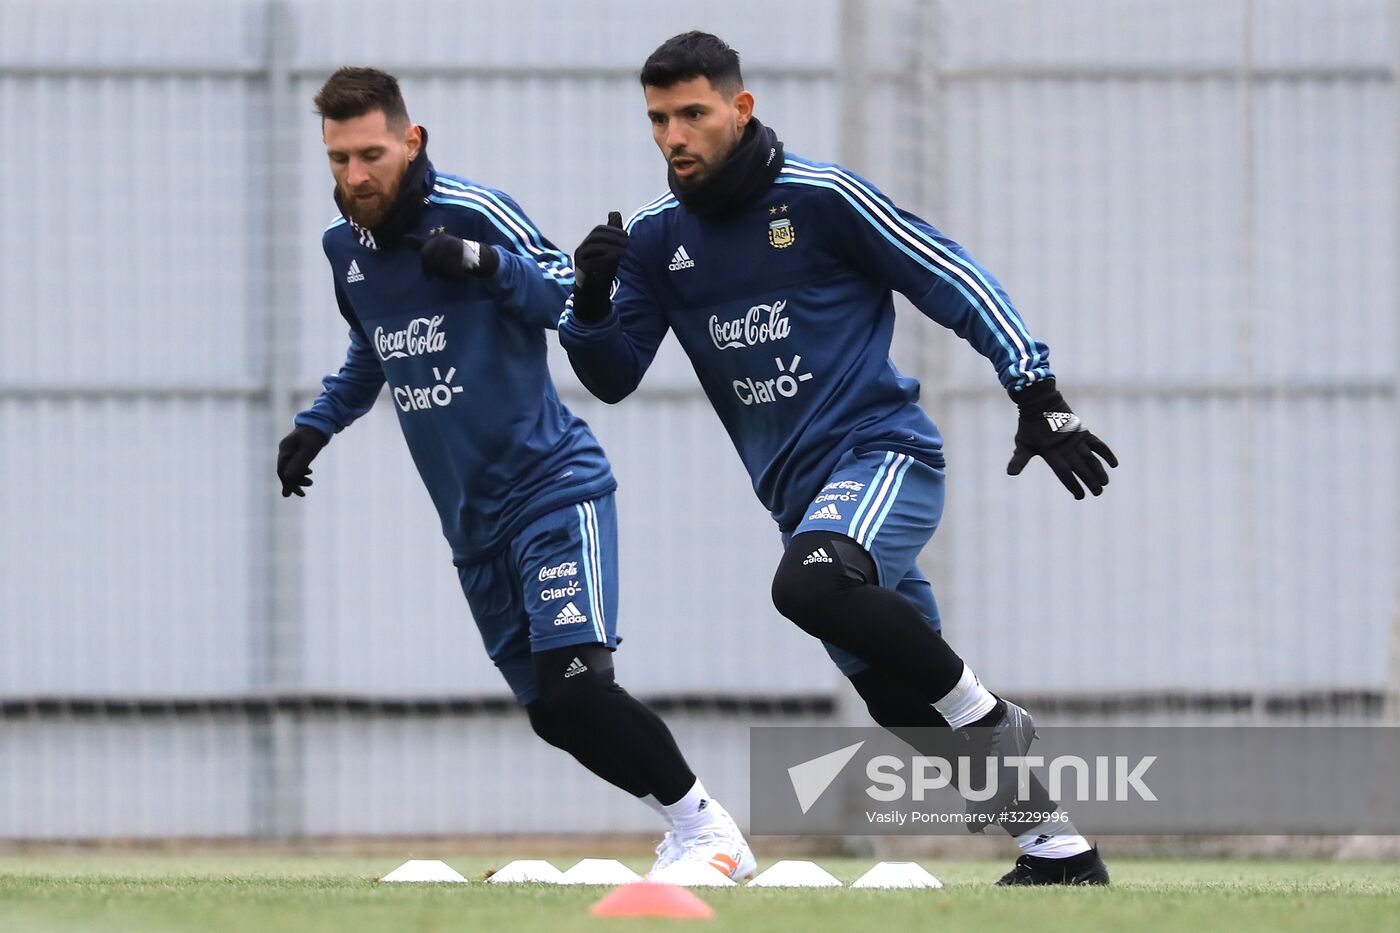 Football. Argentina's national team in training